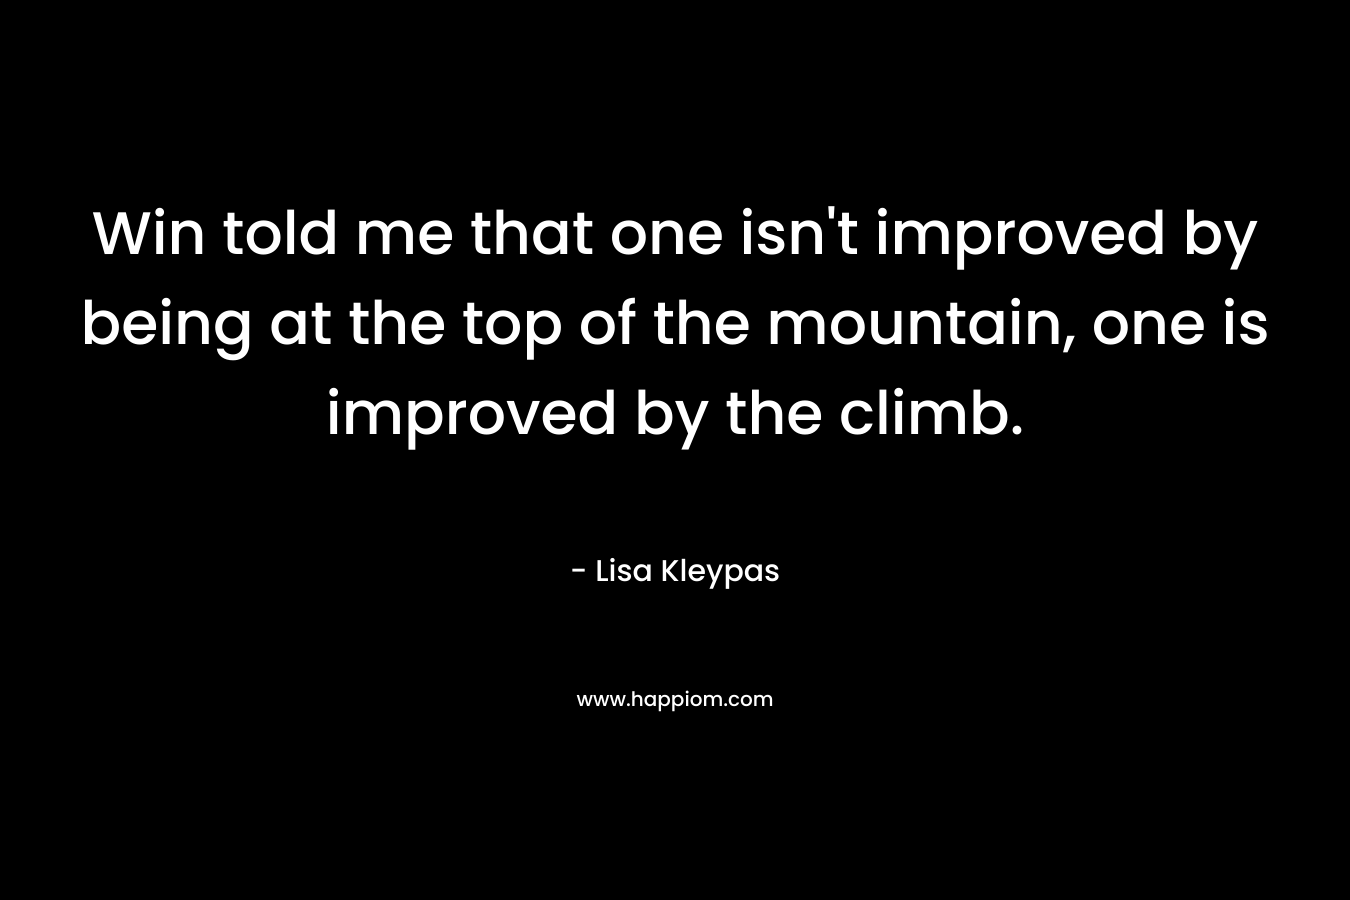 Win told me that one isn’t improved by being at the top of the mountain, one is improved by the climb. – Lisa Kleypas